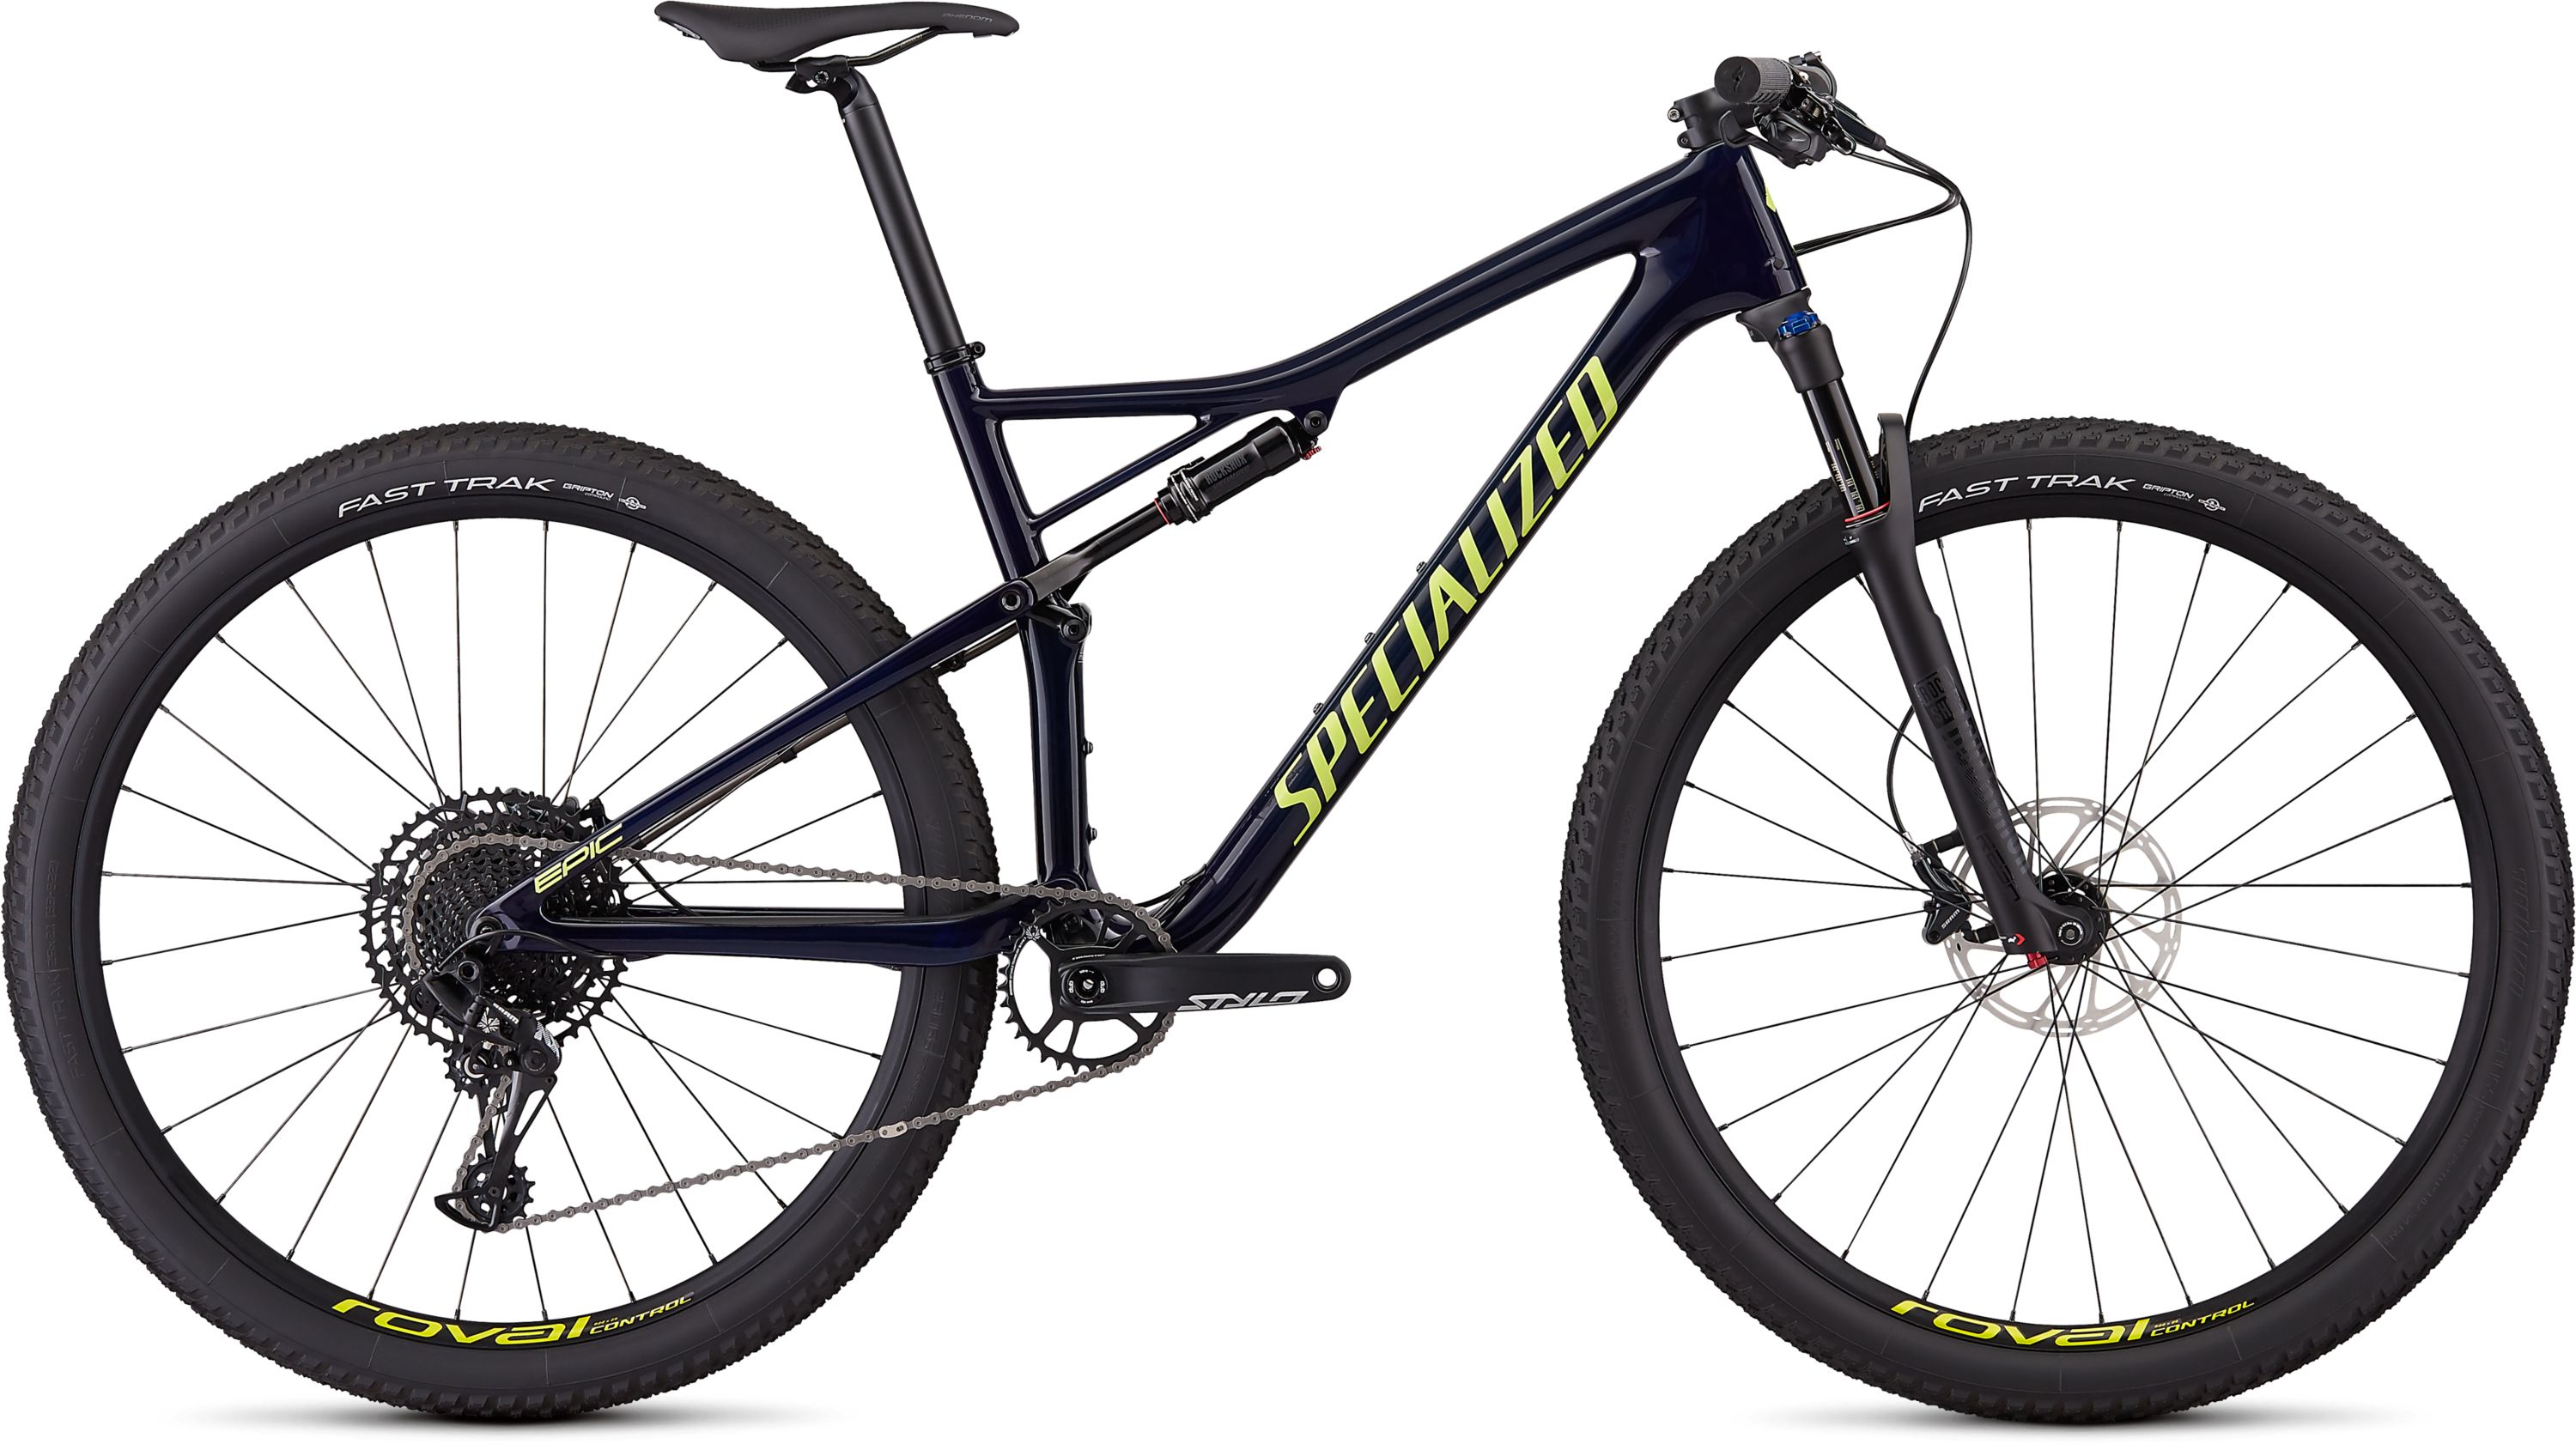 Specialized Epic Comp Carbon 29er Mountain Bike 2019 £2499.99